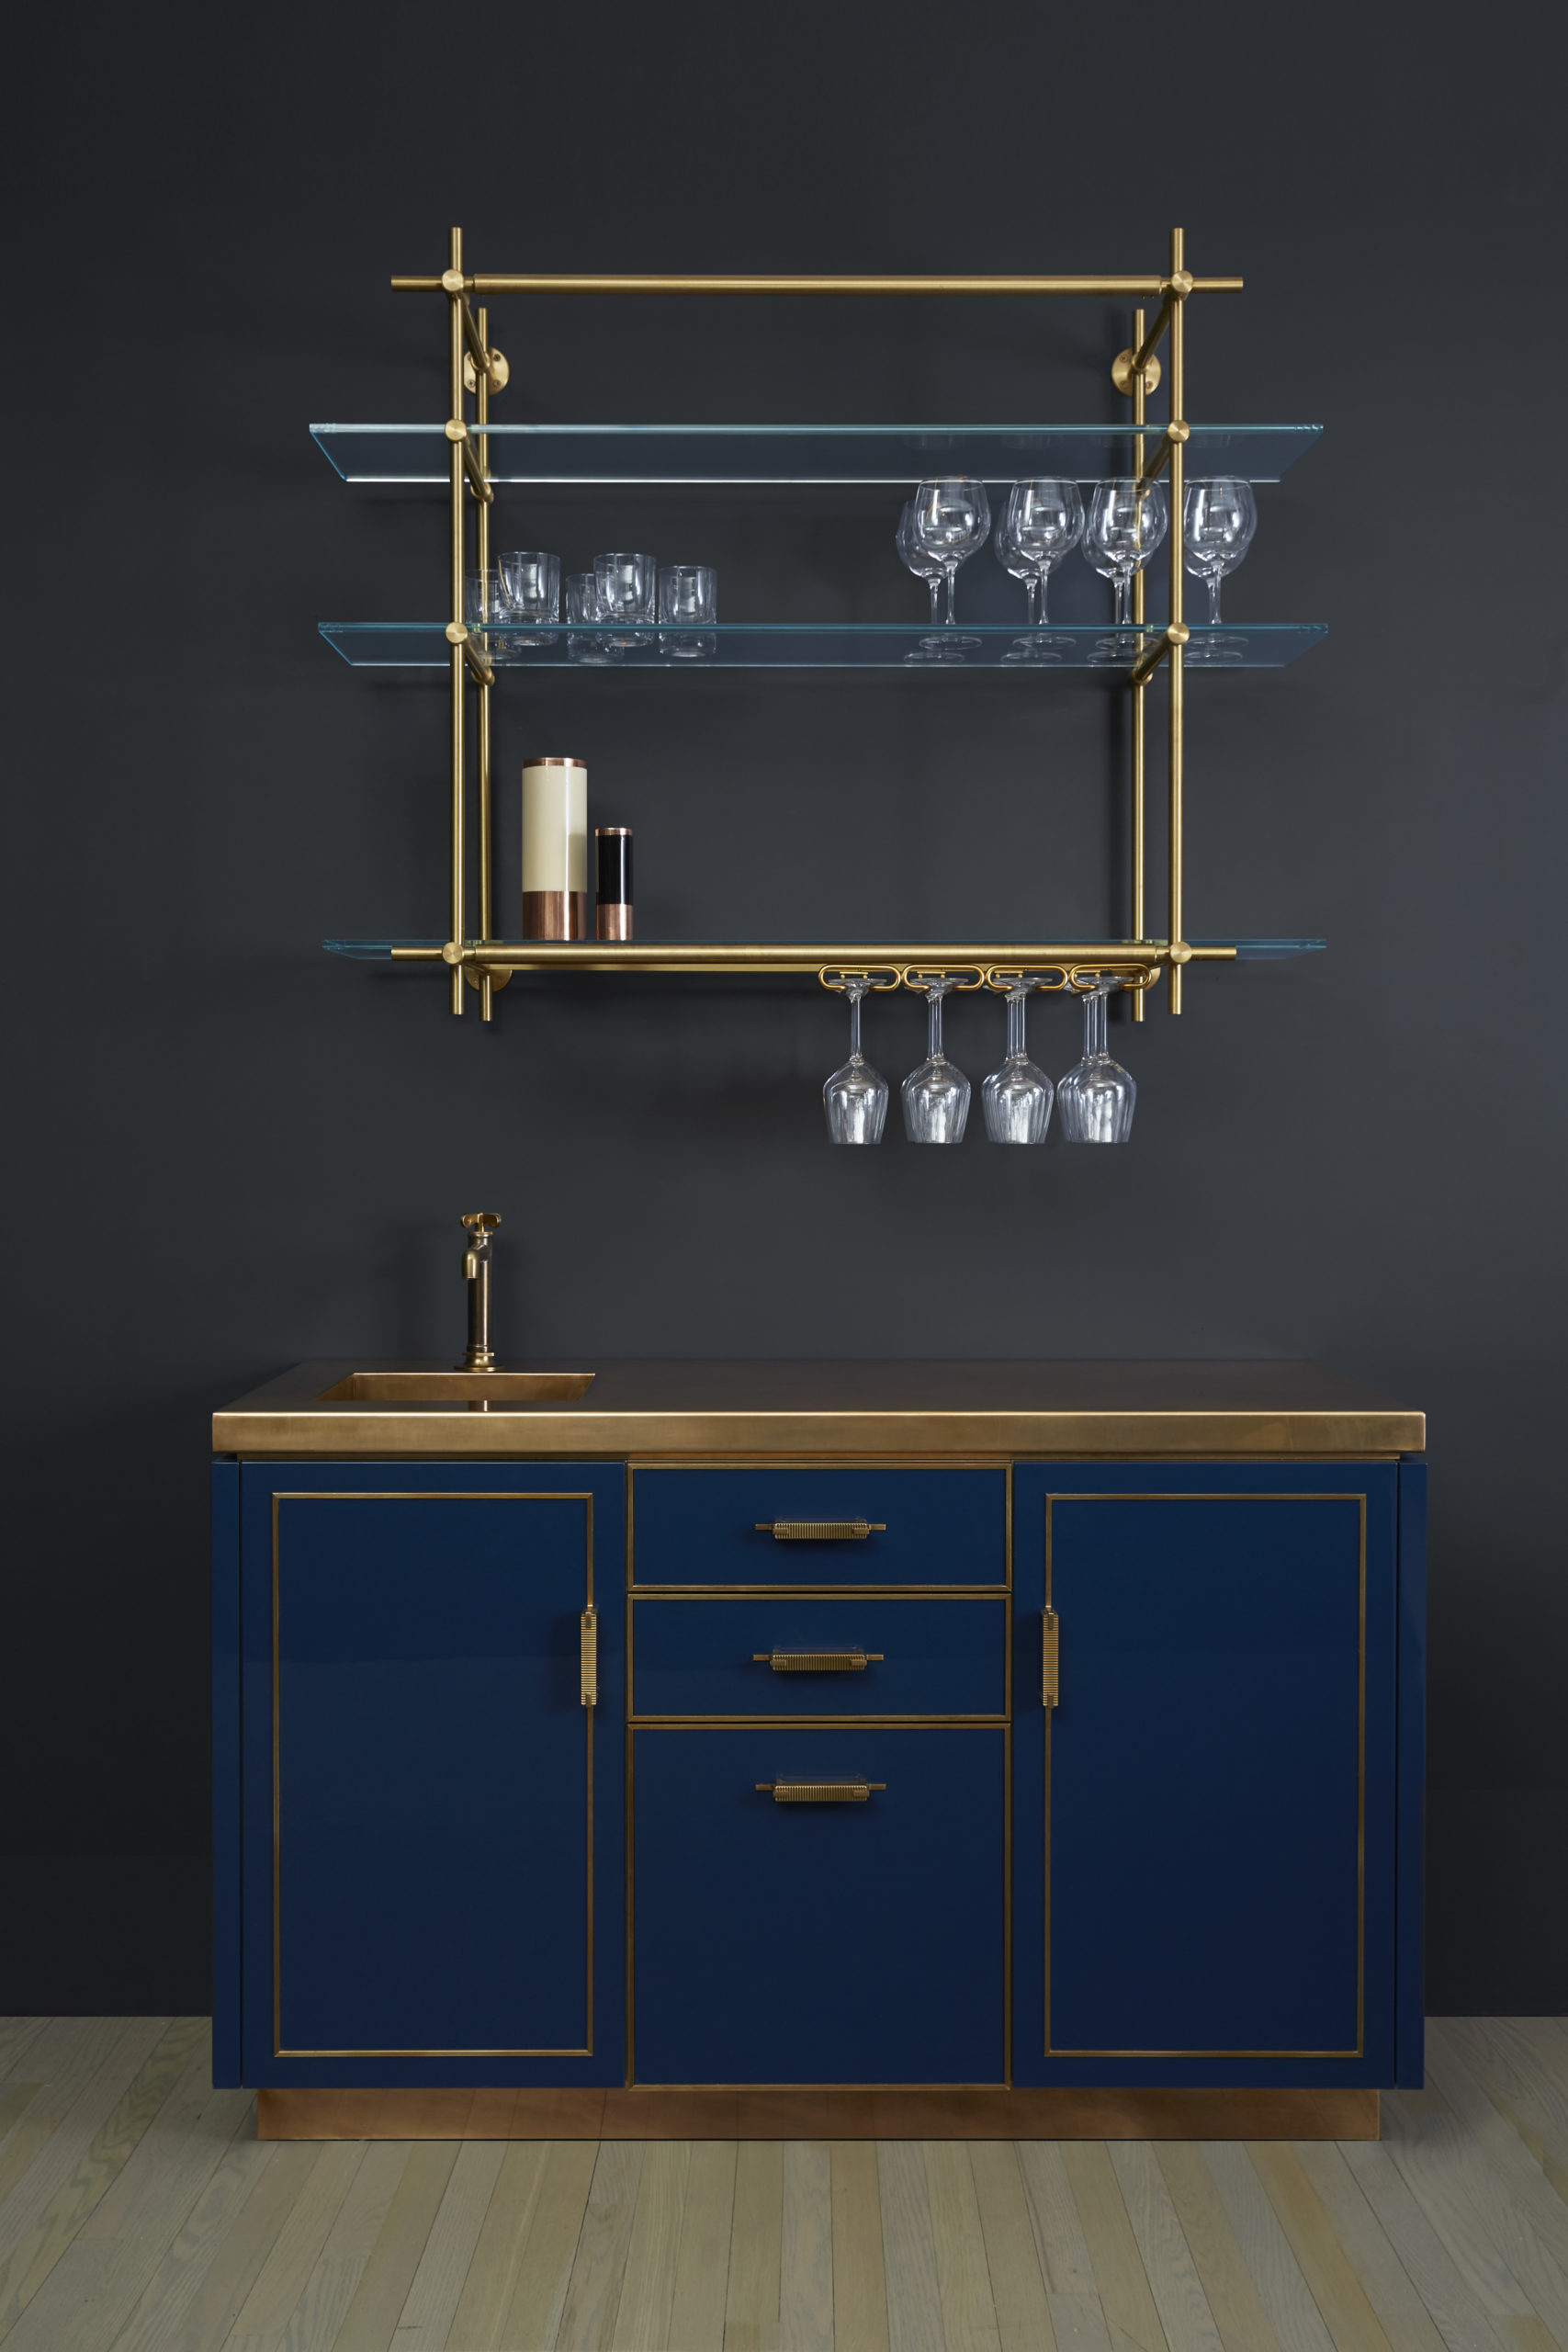 amuneal_products_WNWN_NYDC_2Lacquer-Bar-FRONT-Styled-amuneal_nycshowroom_2019_0330_proof-scaled-1